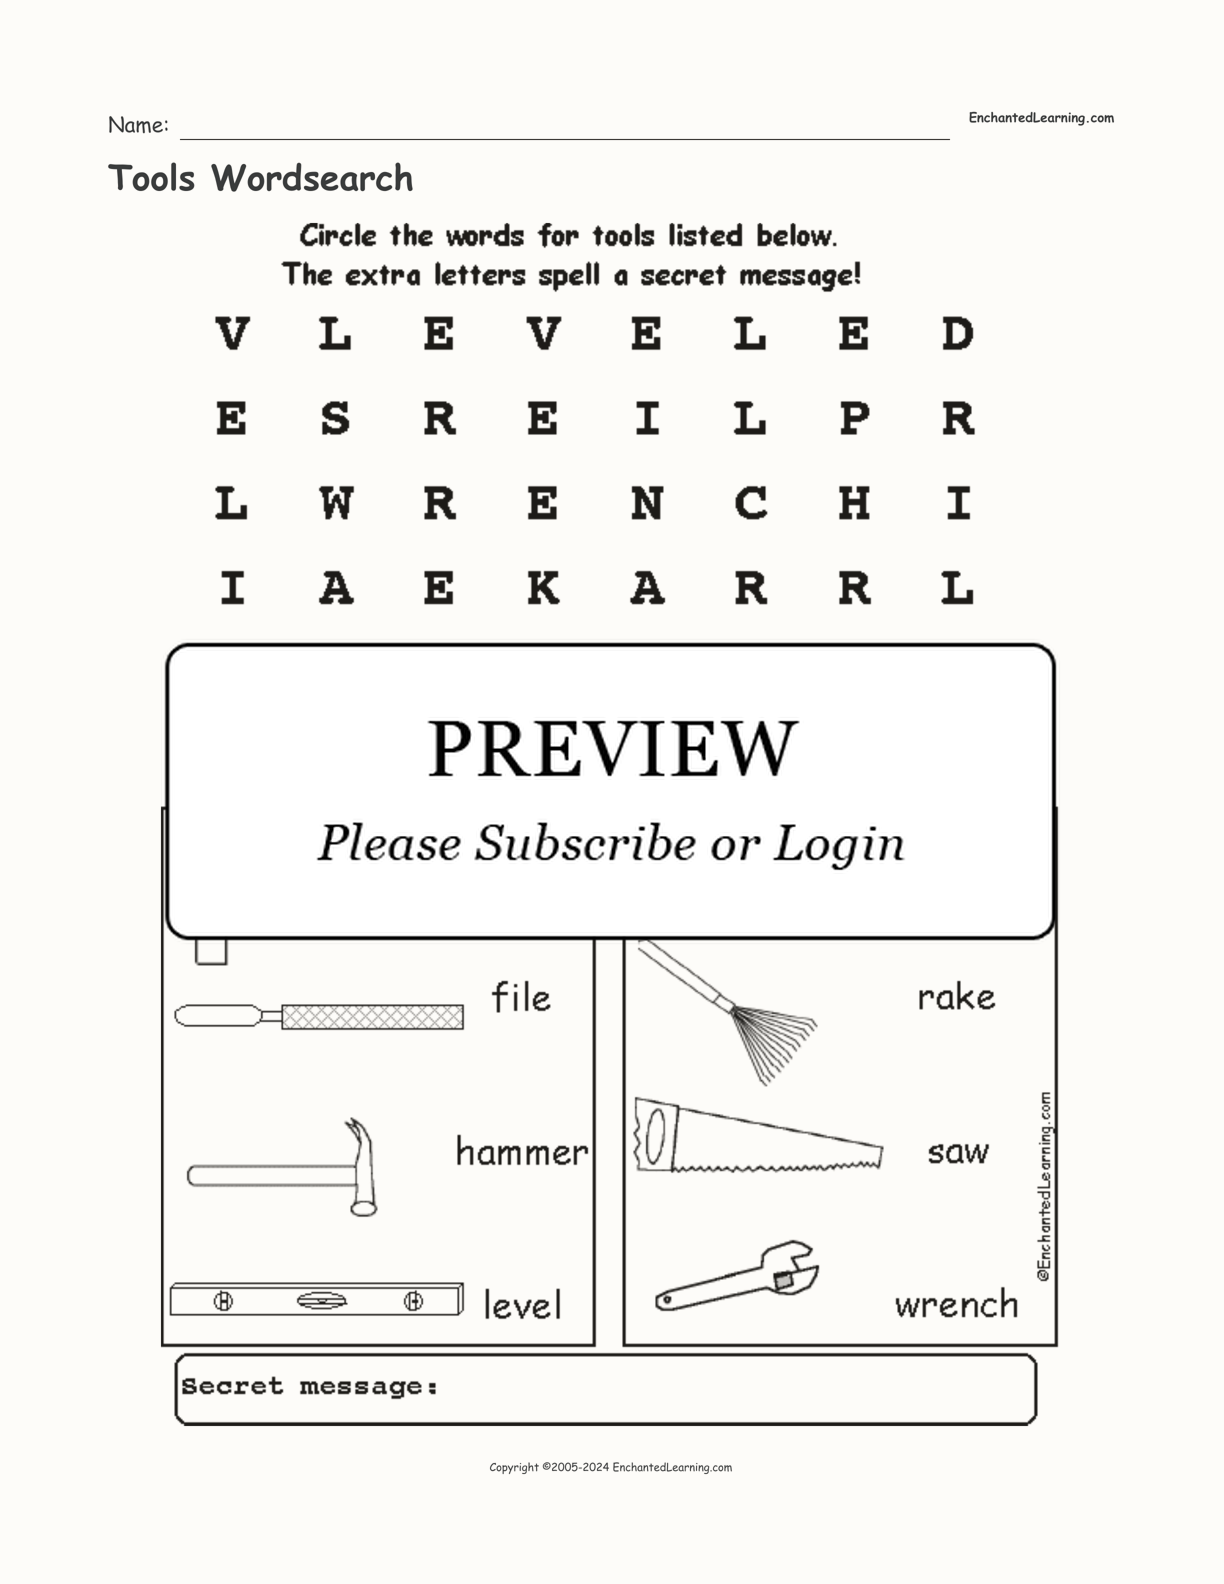 Tools Wordsearch interactive worksheet page 1